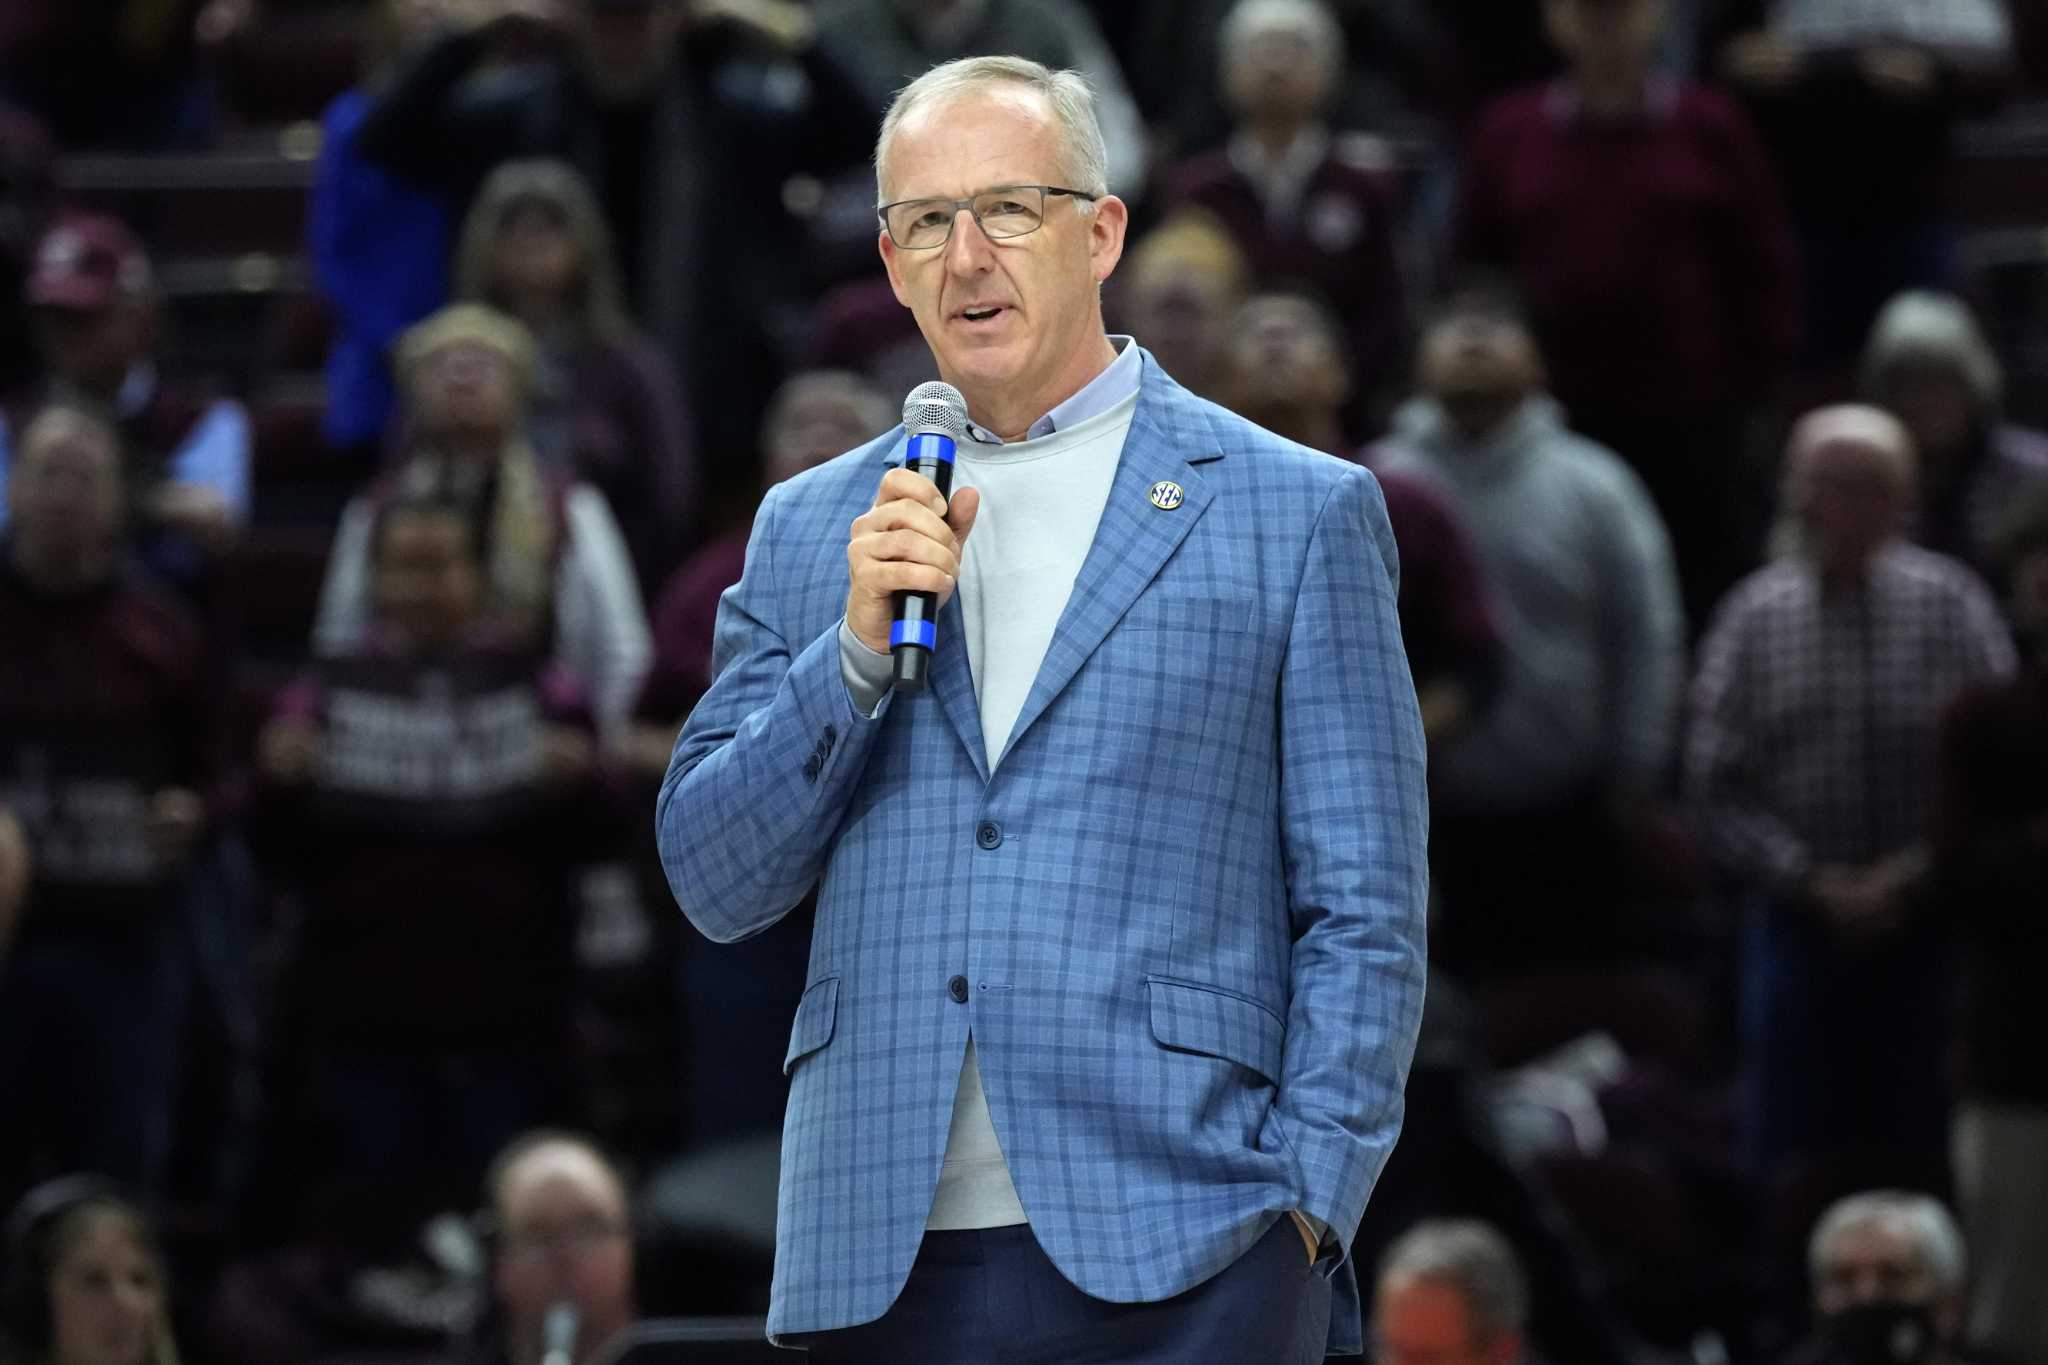 SEC commissioner Greg Sankey owns as much as ineffective communication with A&M relating to Texas, Oklahoma